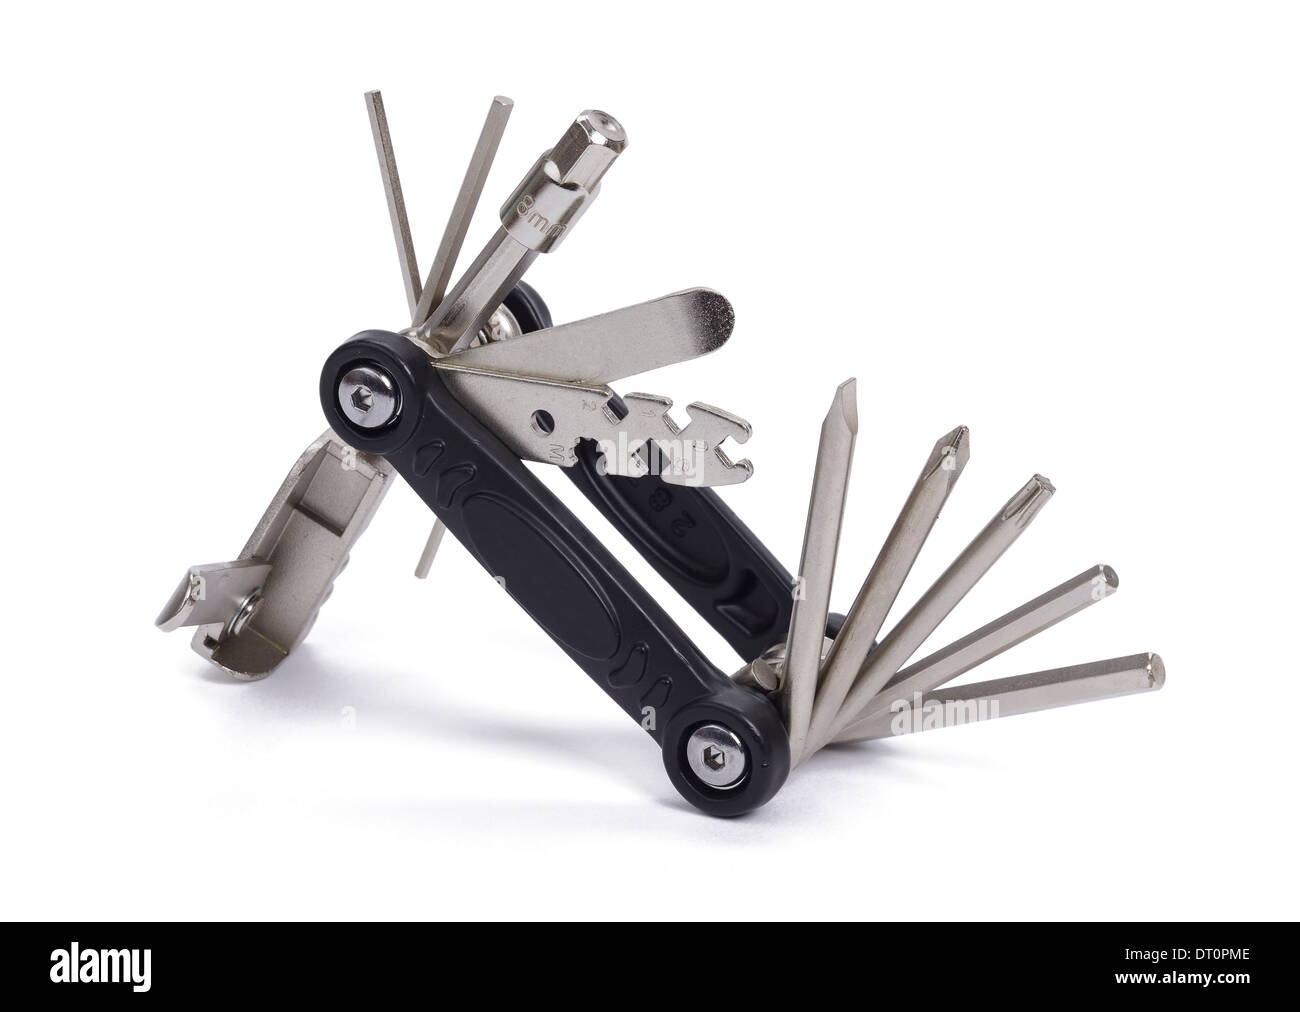 Multi tool set for cyclists Stock Photo